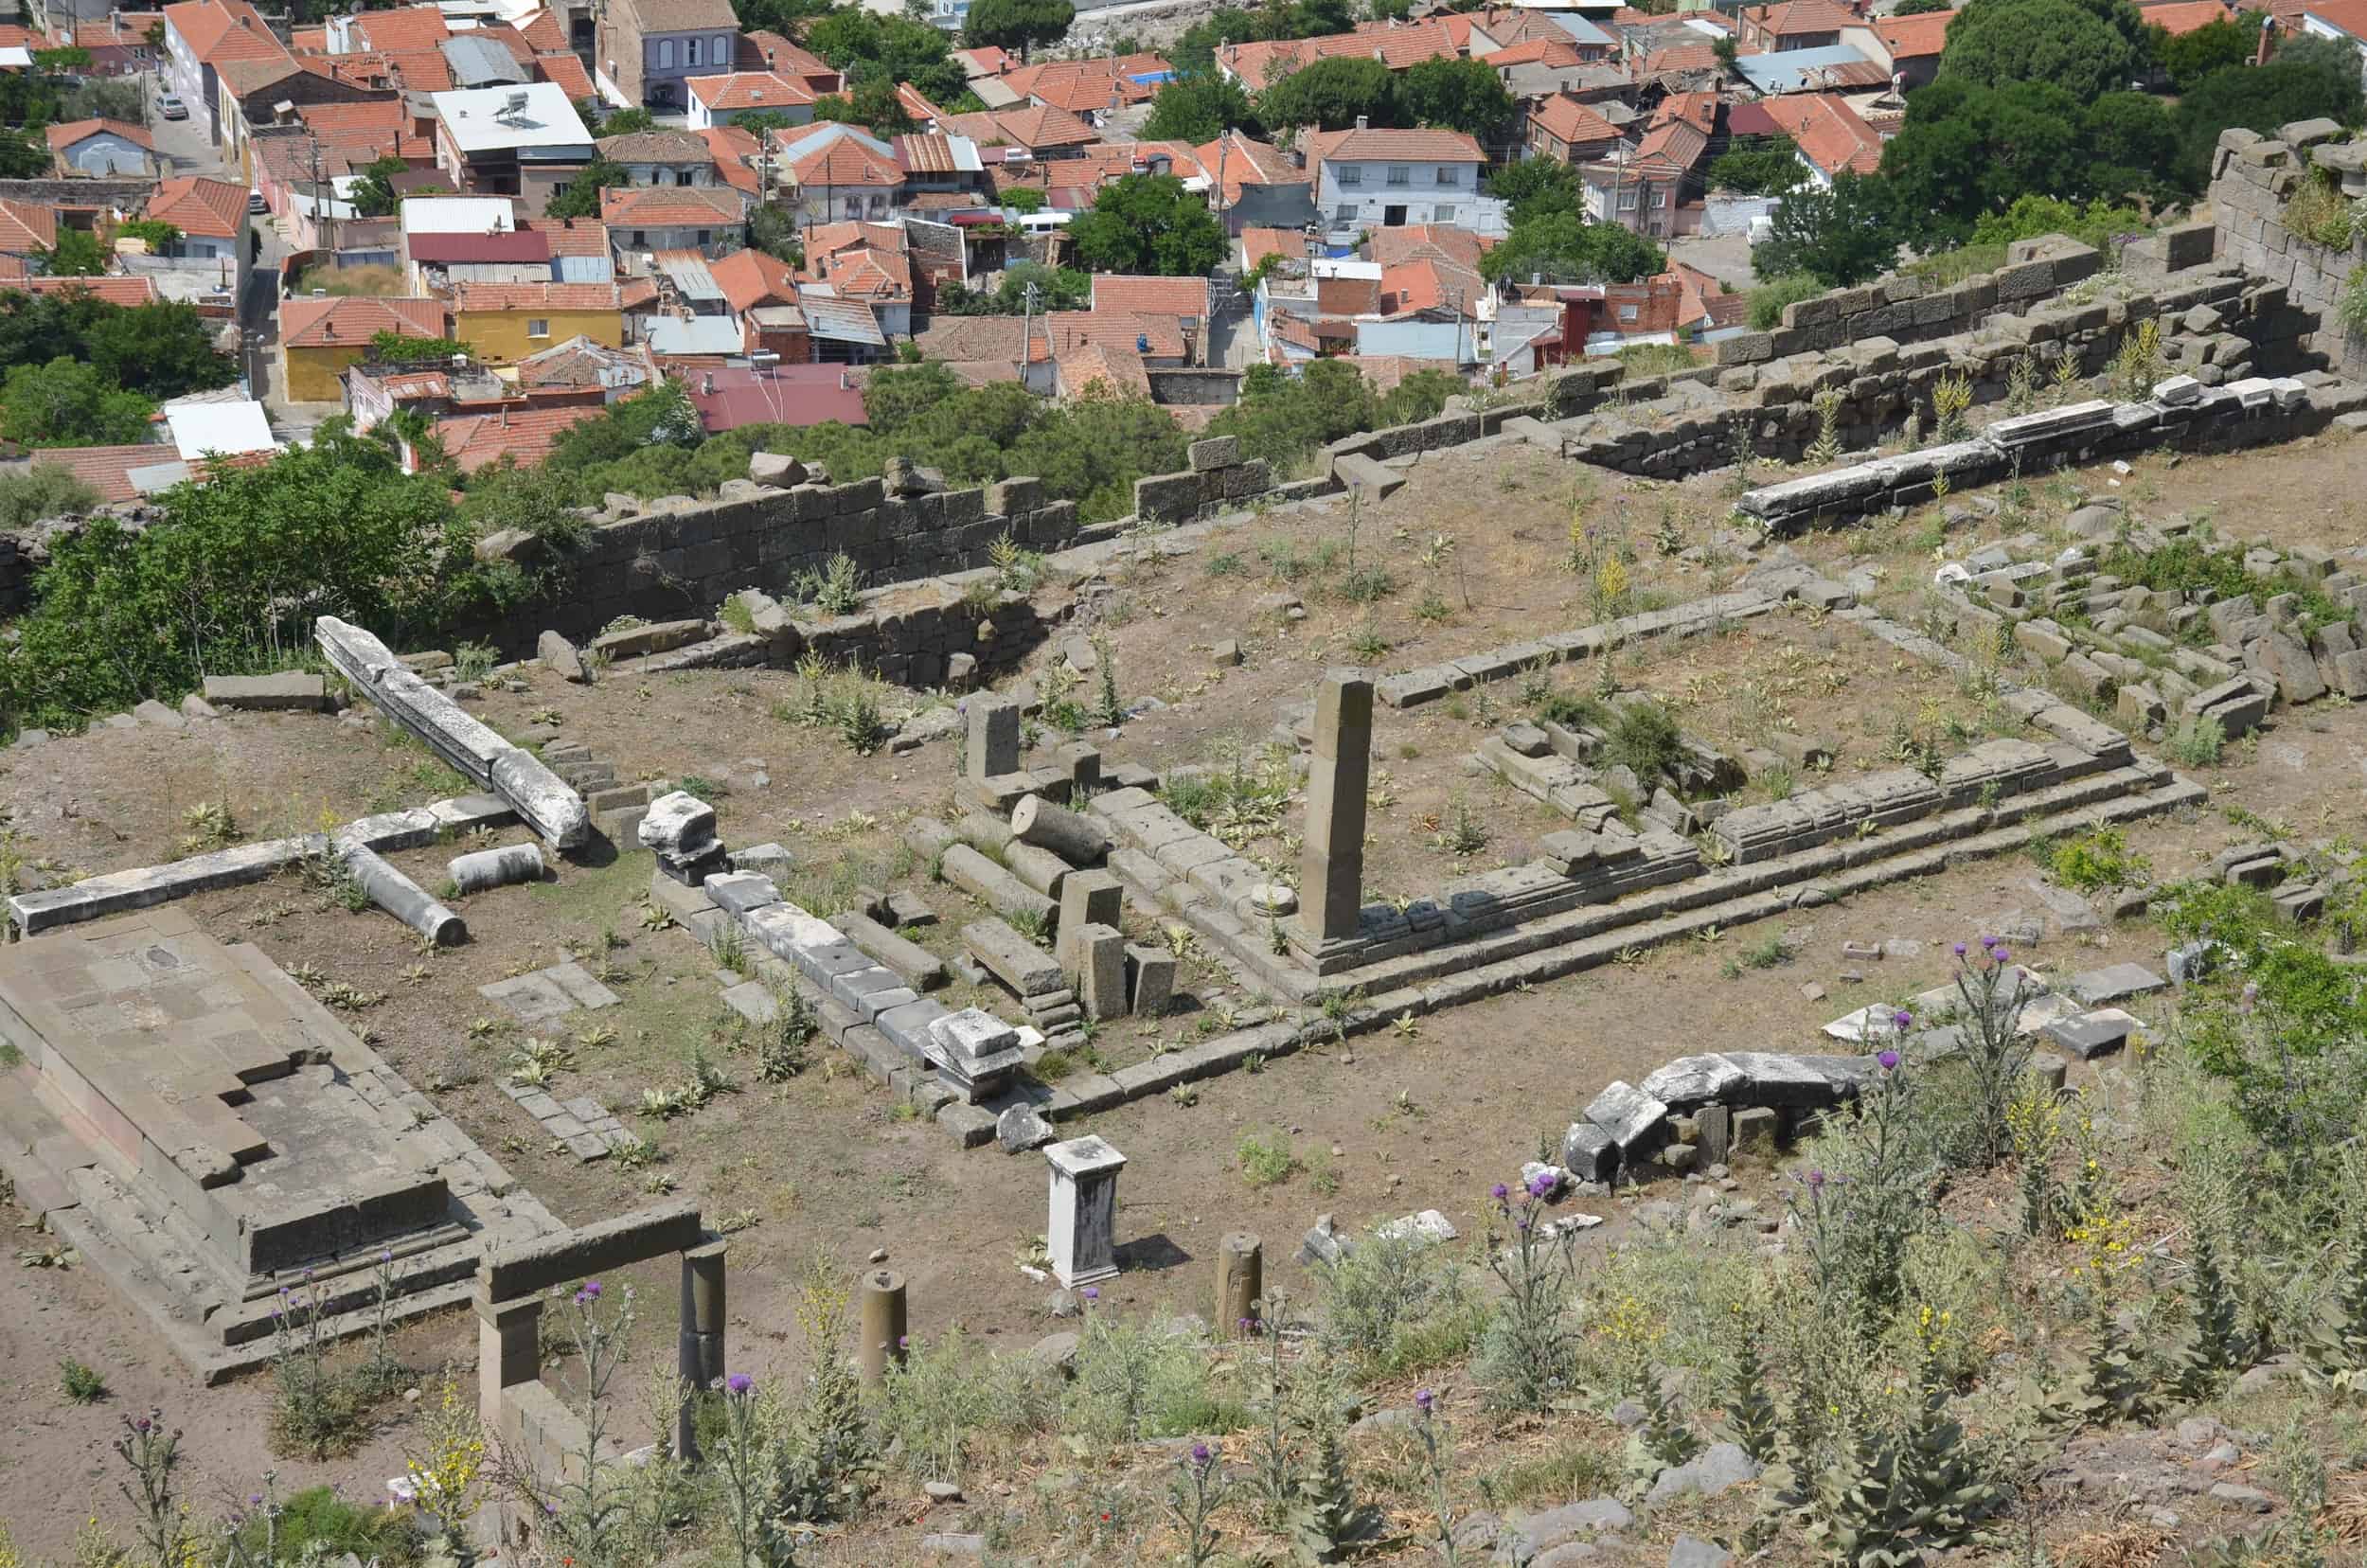 Altar (left) and temple (center to right) at the Sanctuary of Demeter in the Lower Acropolis of Pergamon